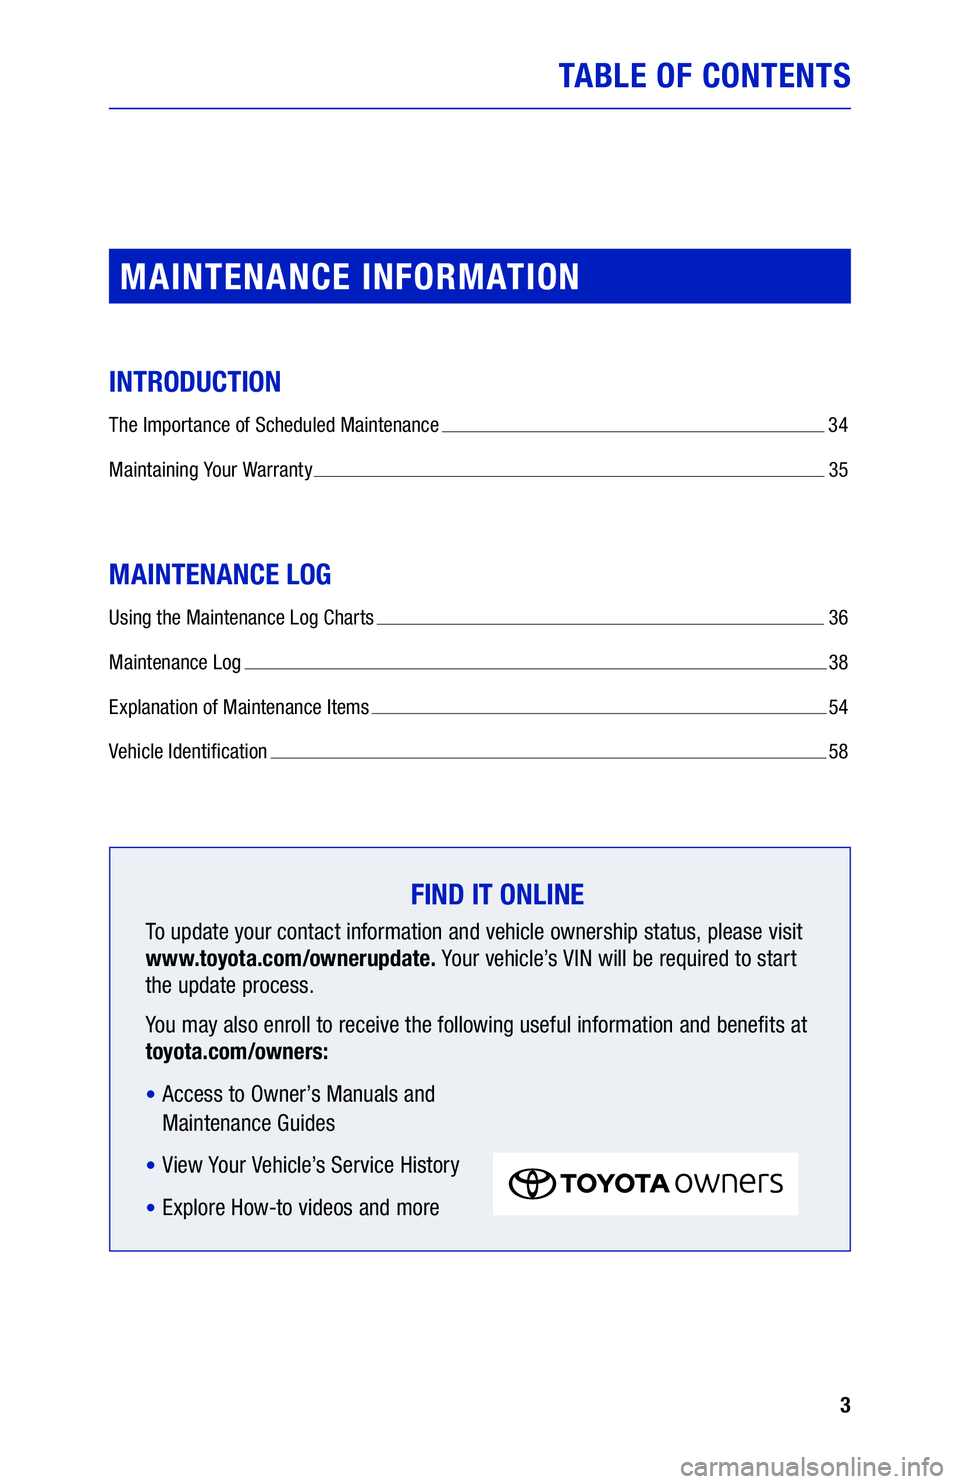 TOYOTA SIENNA 2020  Warranties & Maintenance Guides (in English) 3
TABLE OF CONTENTS
MAINTENANCE INFORMATION
INTRODUCTION
The Importance of Scheduled Maintenance  34
Maintaining Your Warranty  35
MAINTENANCE LOG
Using the Maintenance Log Charts  36
Maintenance Log 